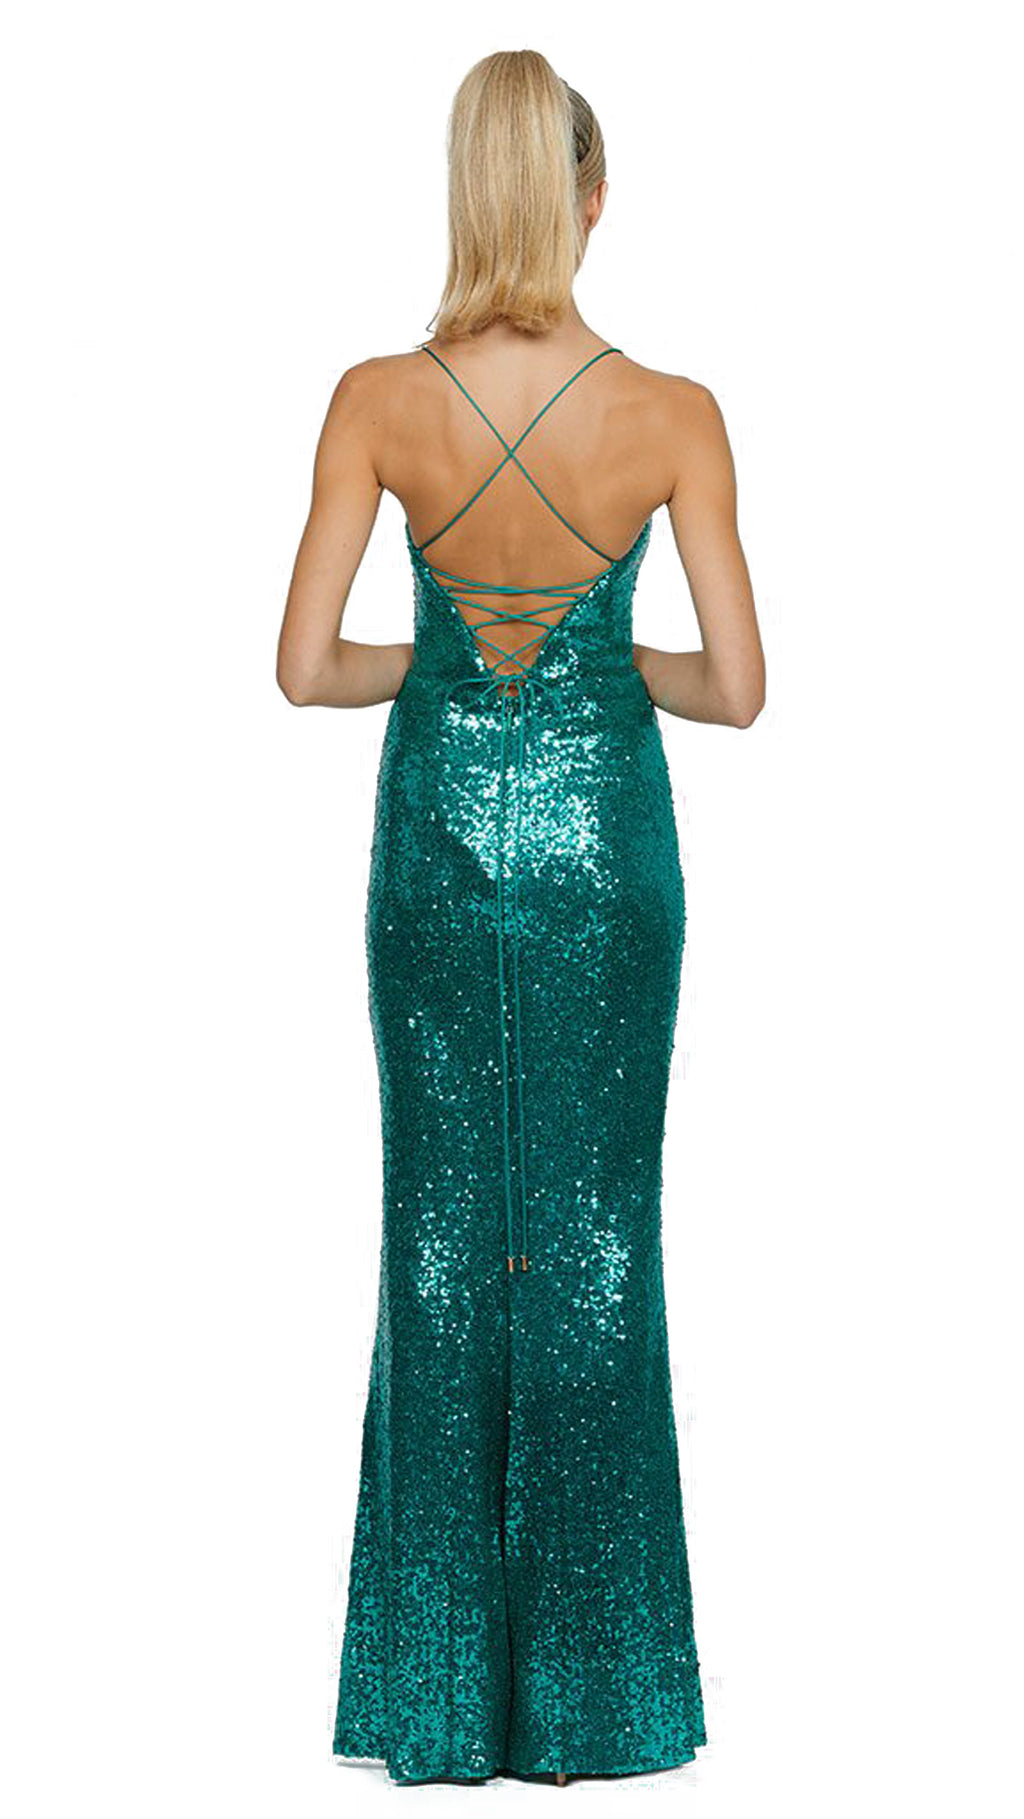 Stephanie Cowl Sequin Gown in Emerald with Strappy Back